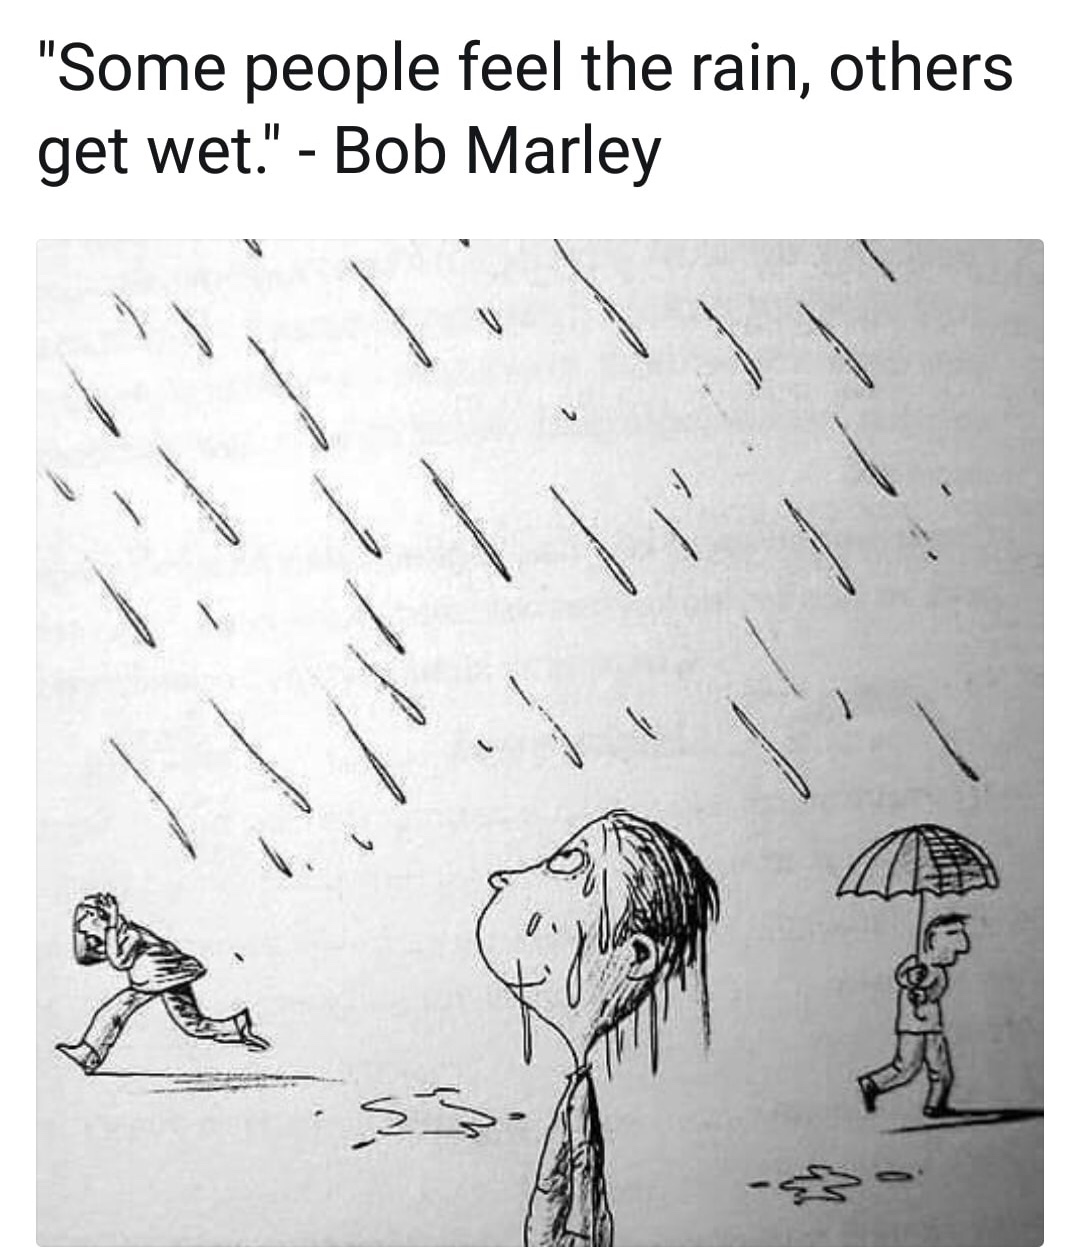 memes - some people feel the rain meme - "Some people feel the rain, others get wet." Bob Marley